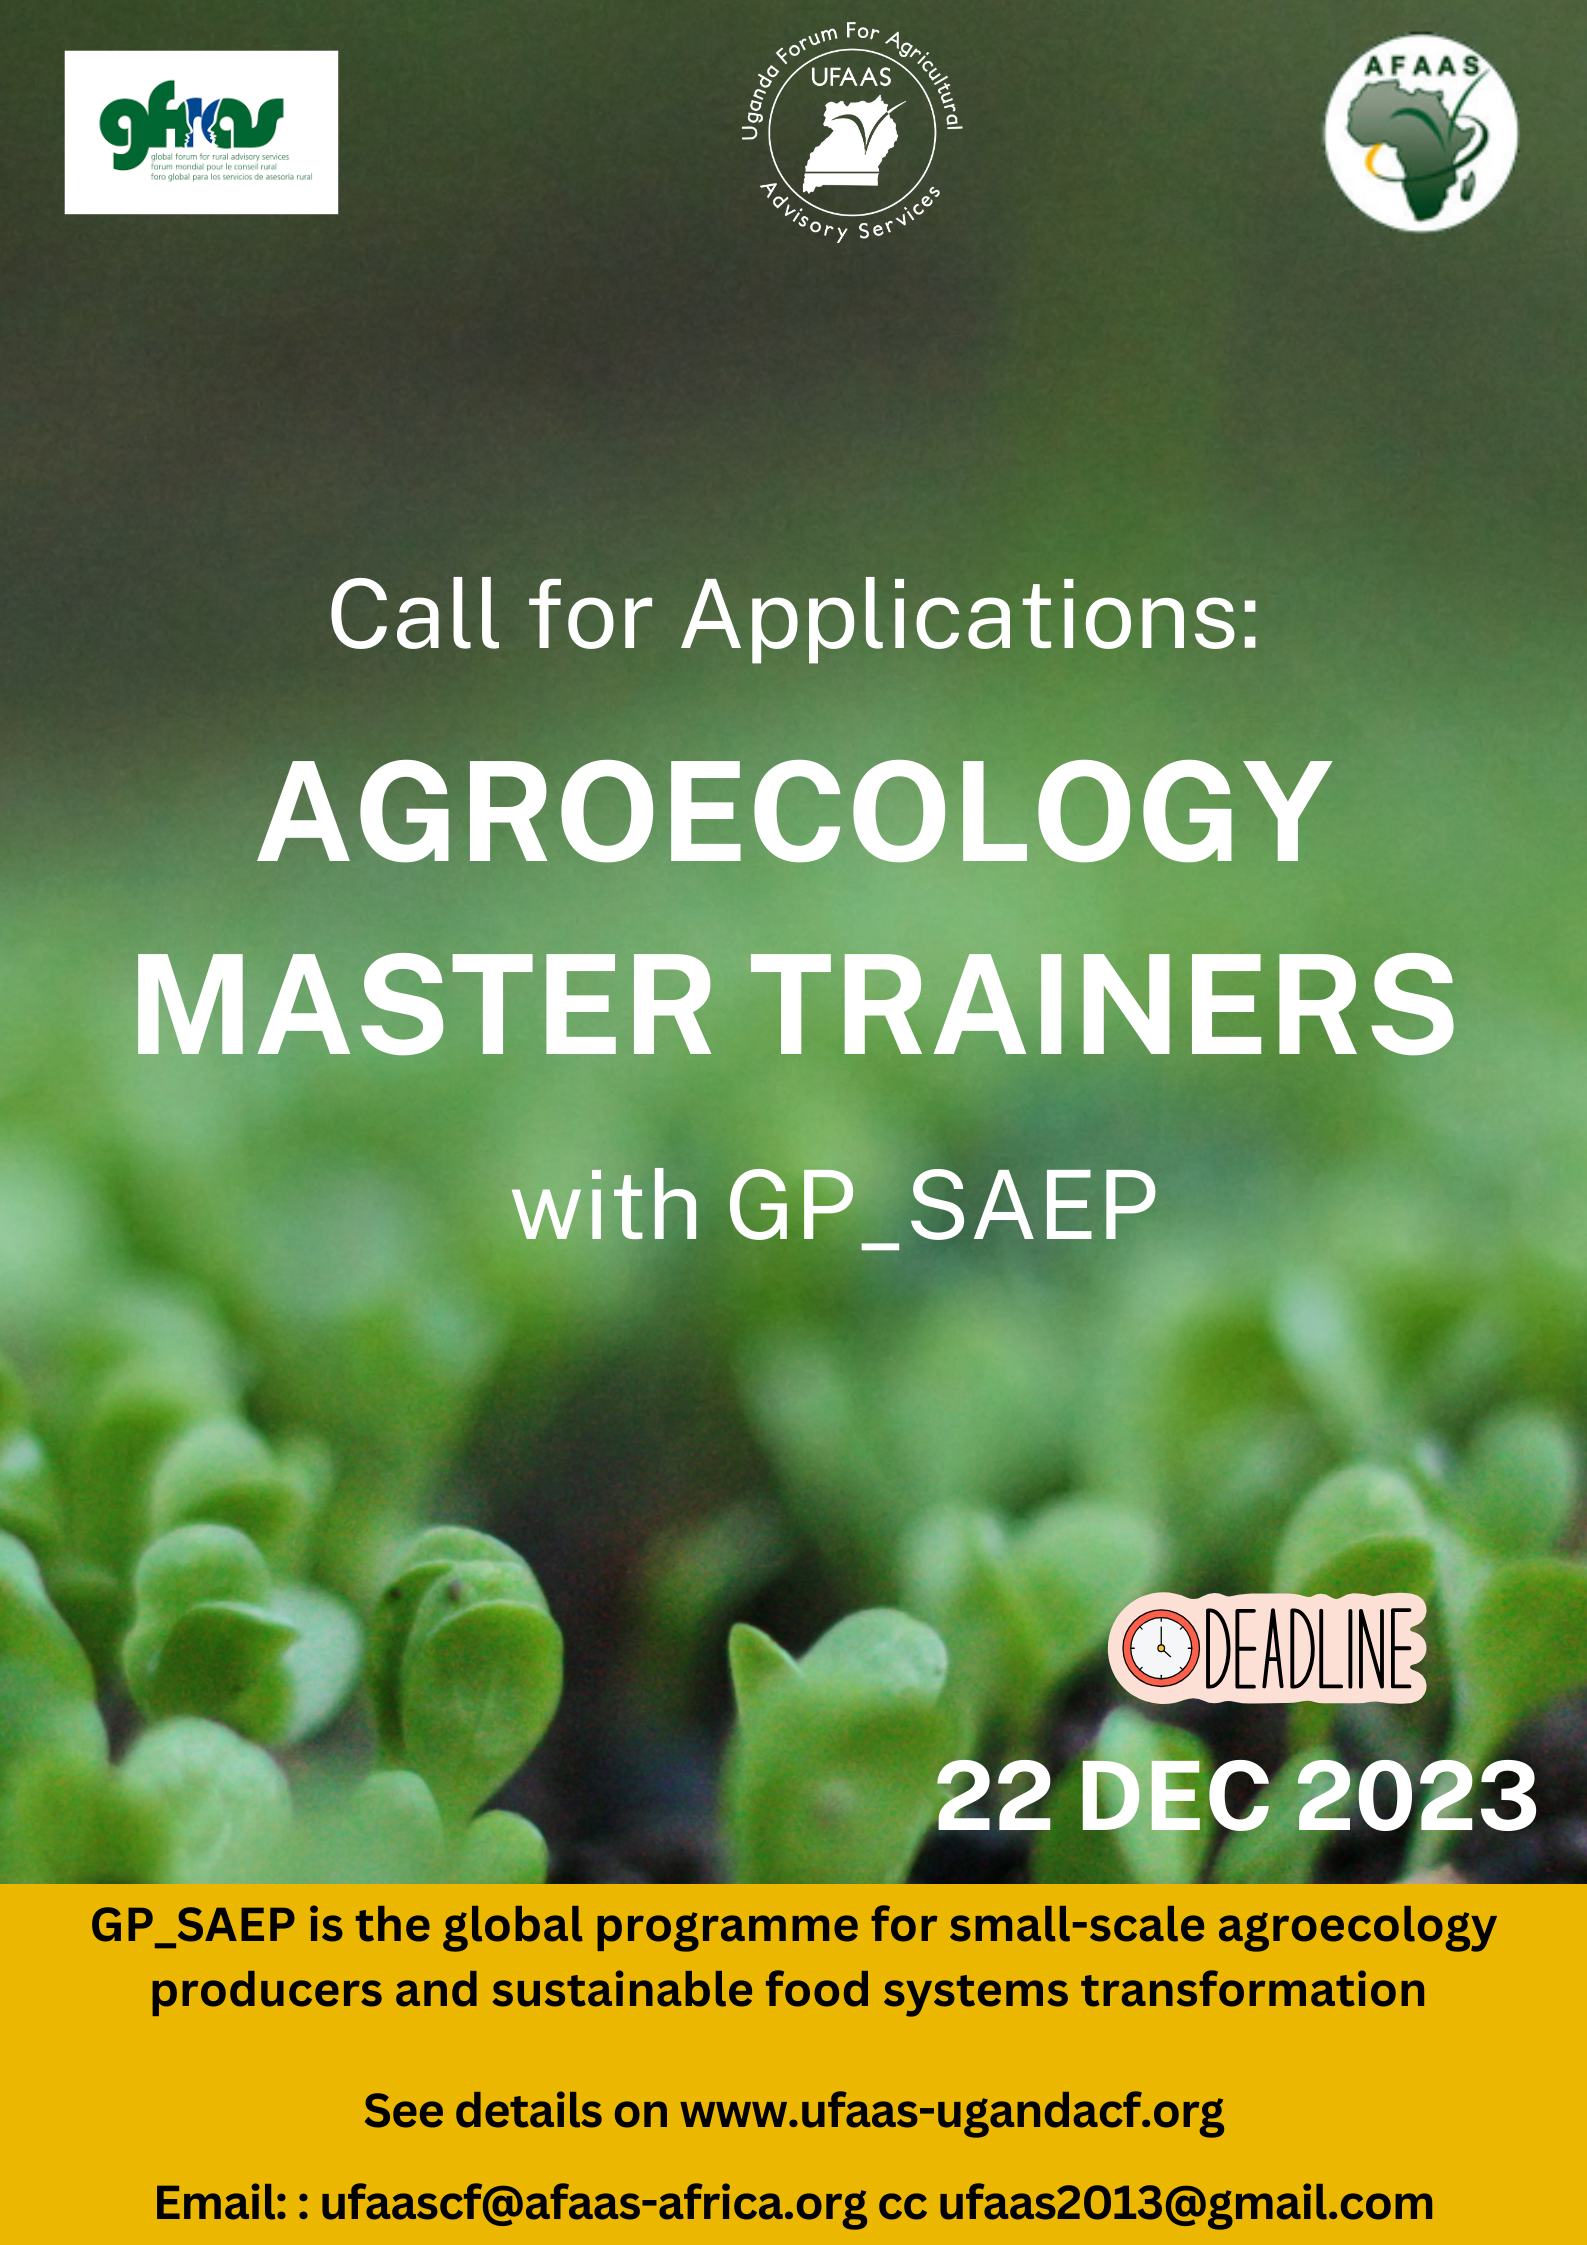 Call for Applications: Agroecology Master Trainers with GP-SAEP